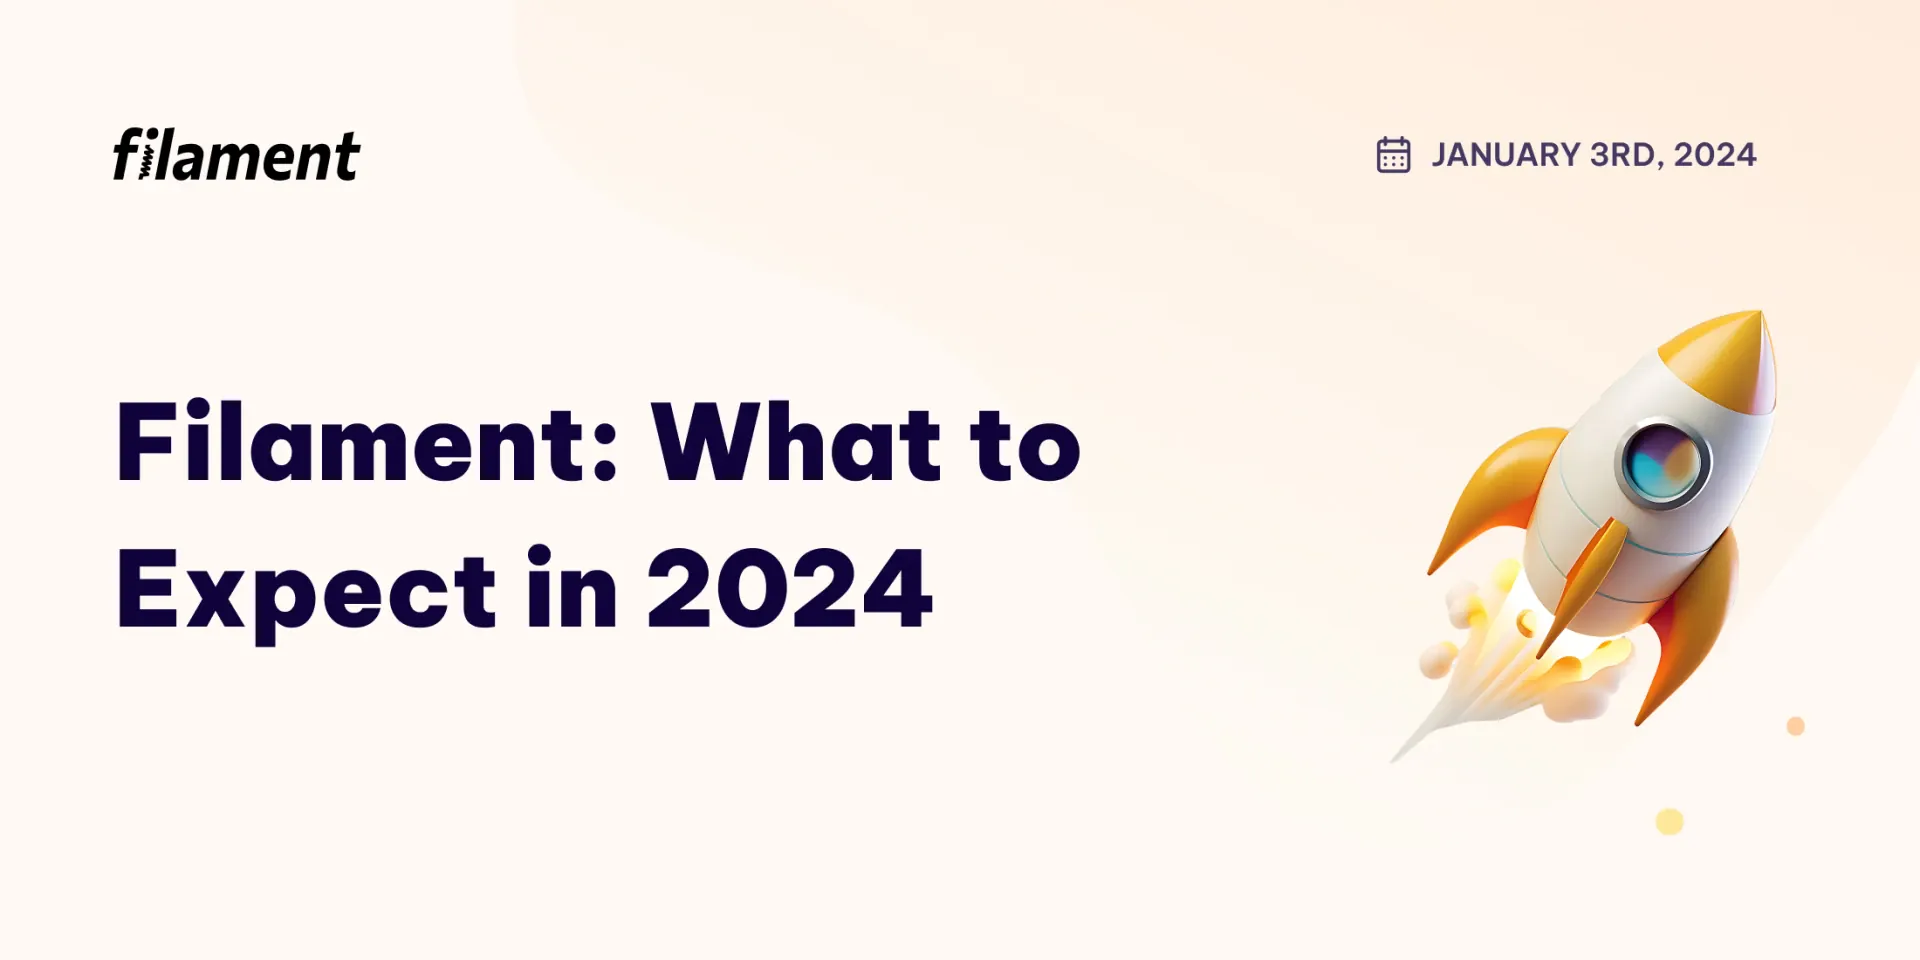 Filament: What to Expect in 2024 image